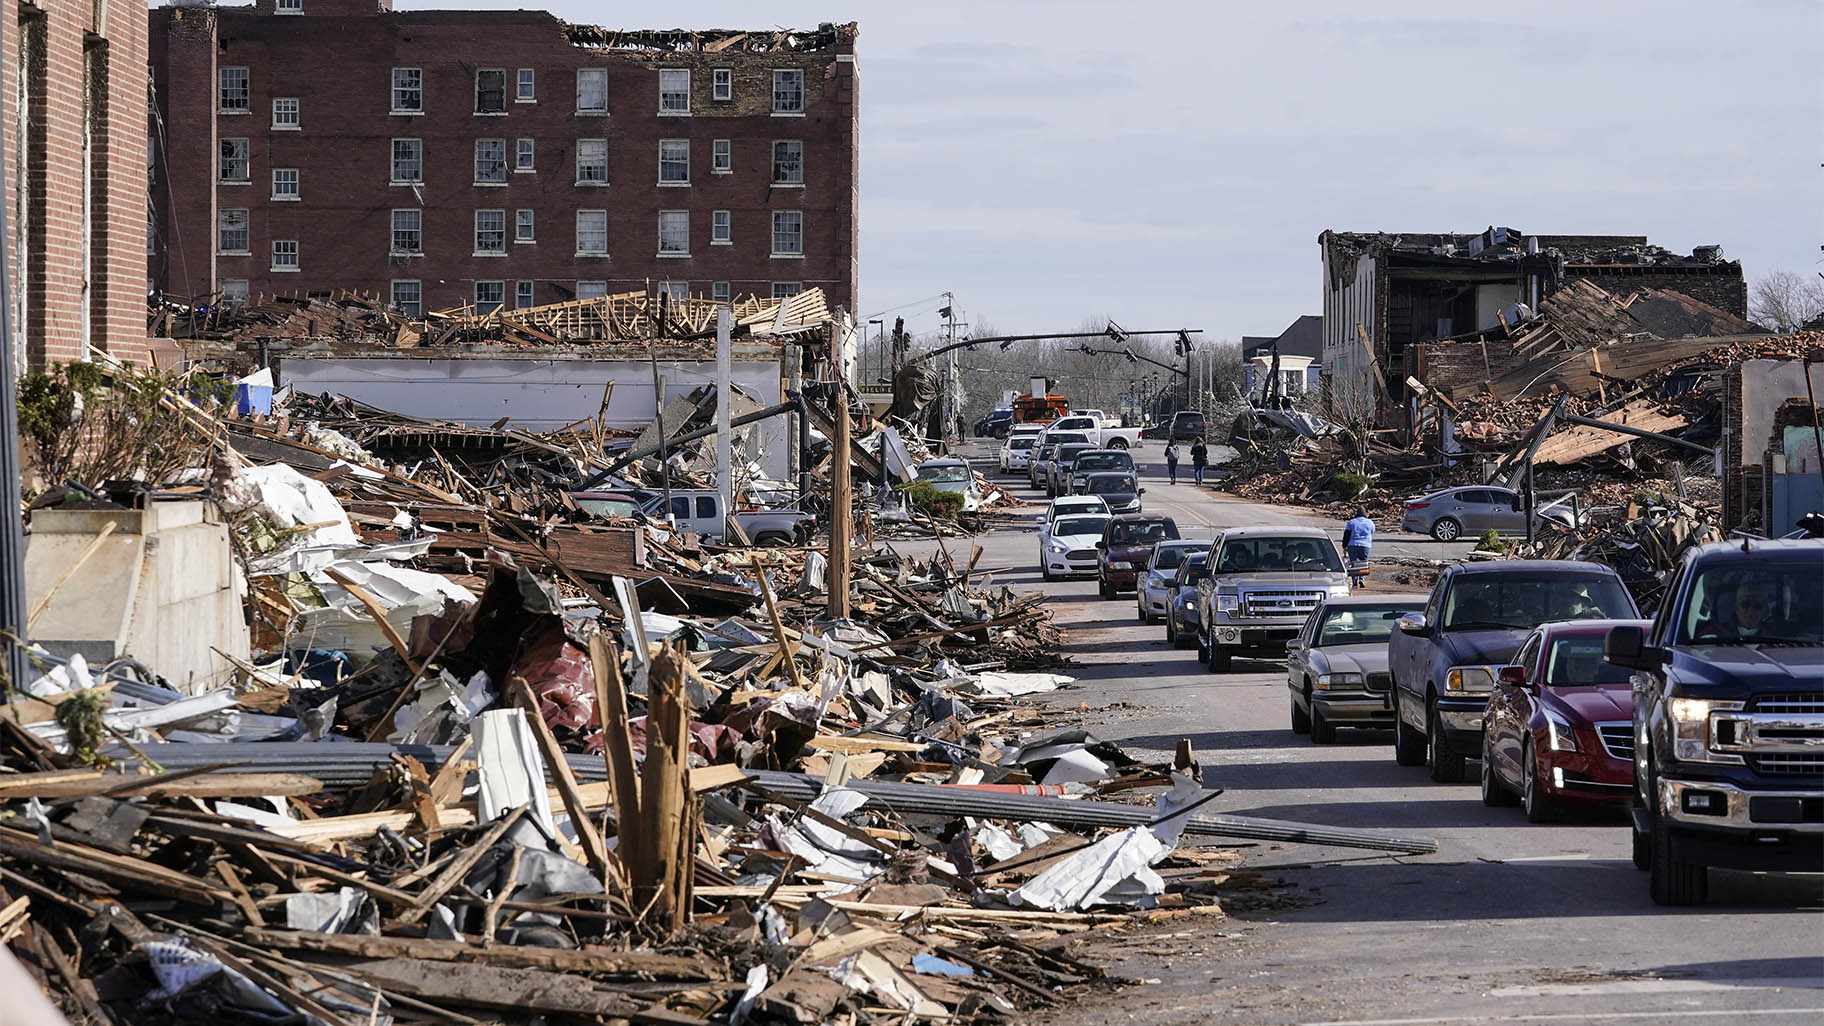 Kentucky Hardest Hit as Storms Leave Dozens Dead in 5 States, Chicago News